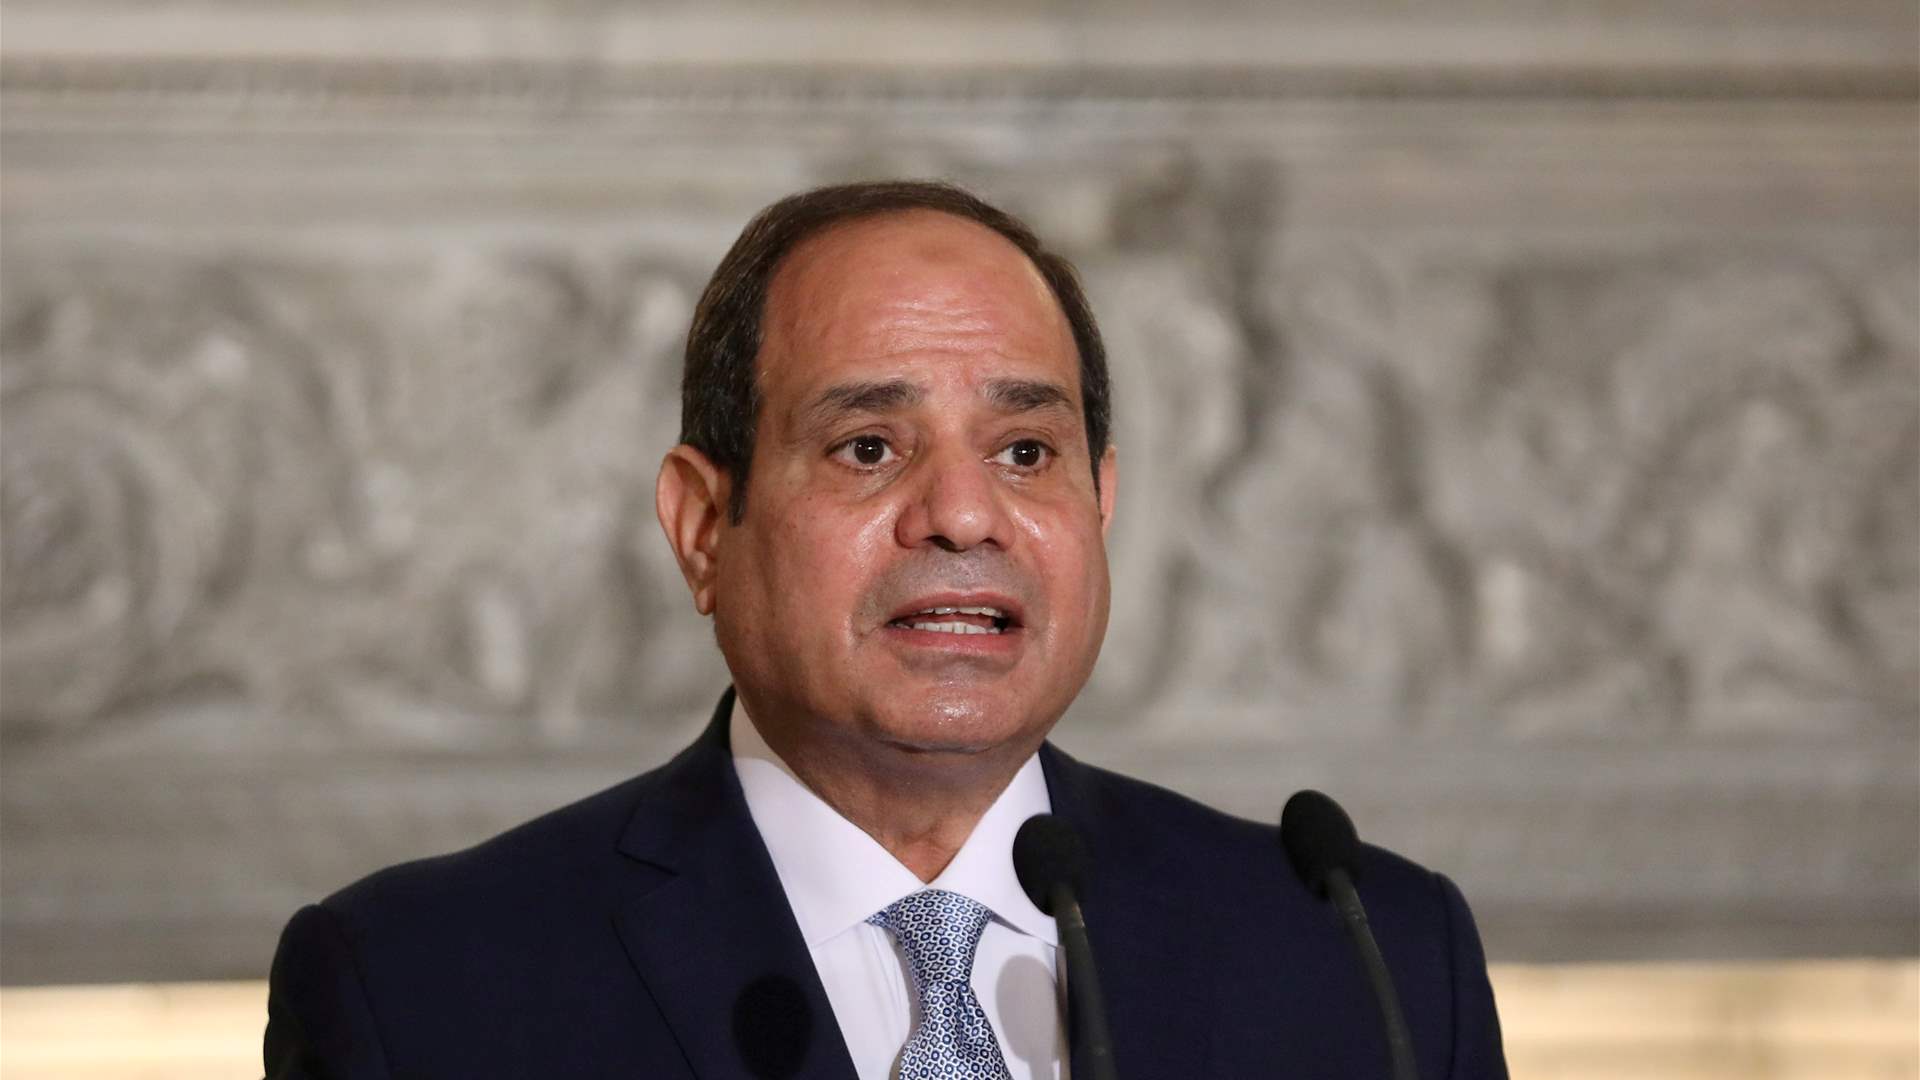 Egypt’s El-Sisi: We have the power, and we will use it to defend ourselves